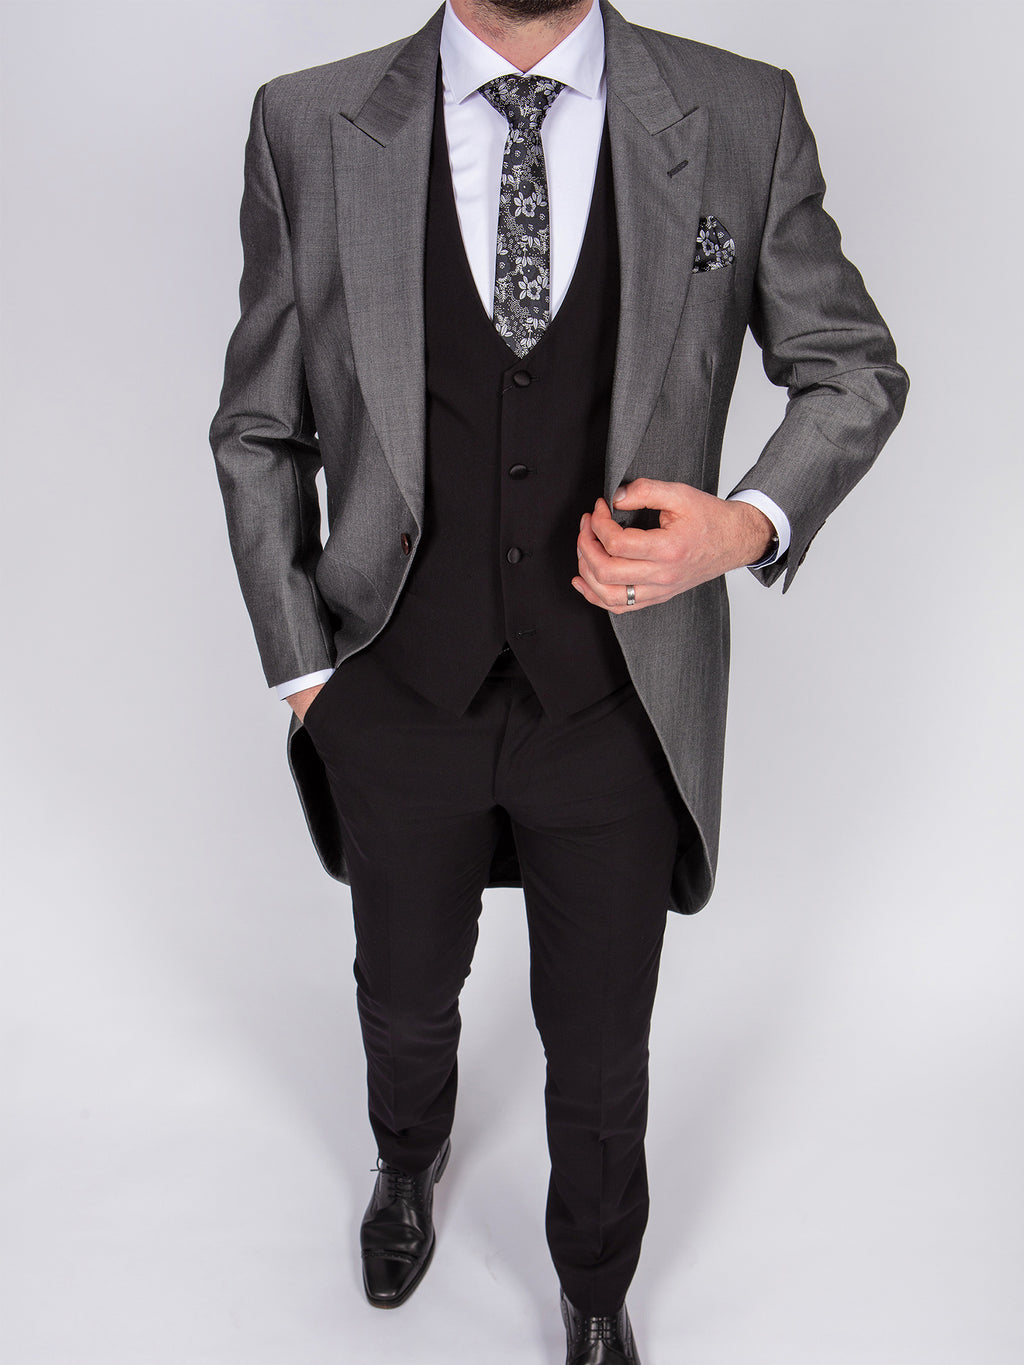 silver-grey-tailcoat-outfit-hire